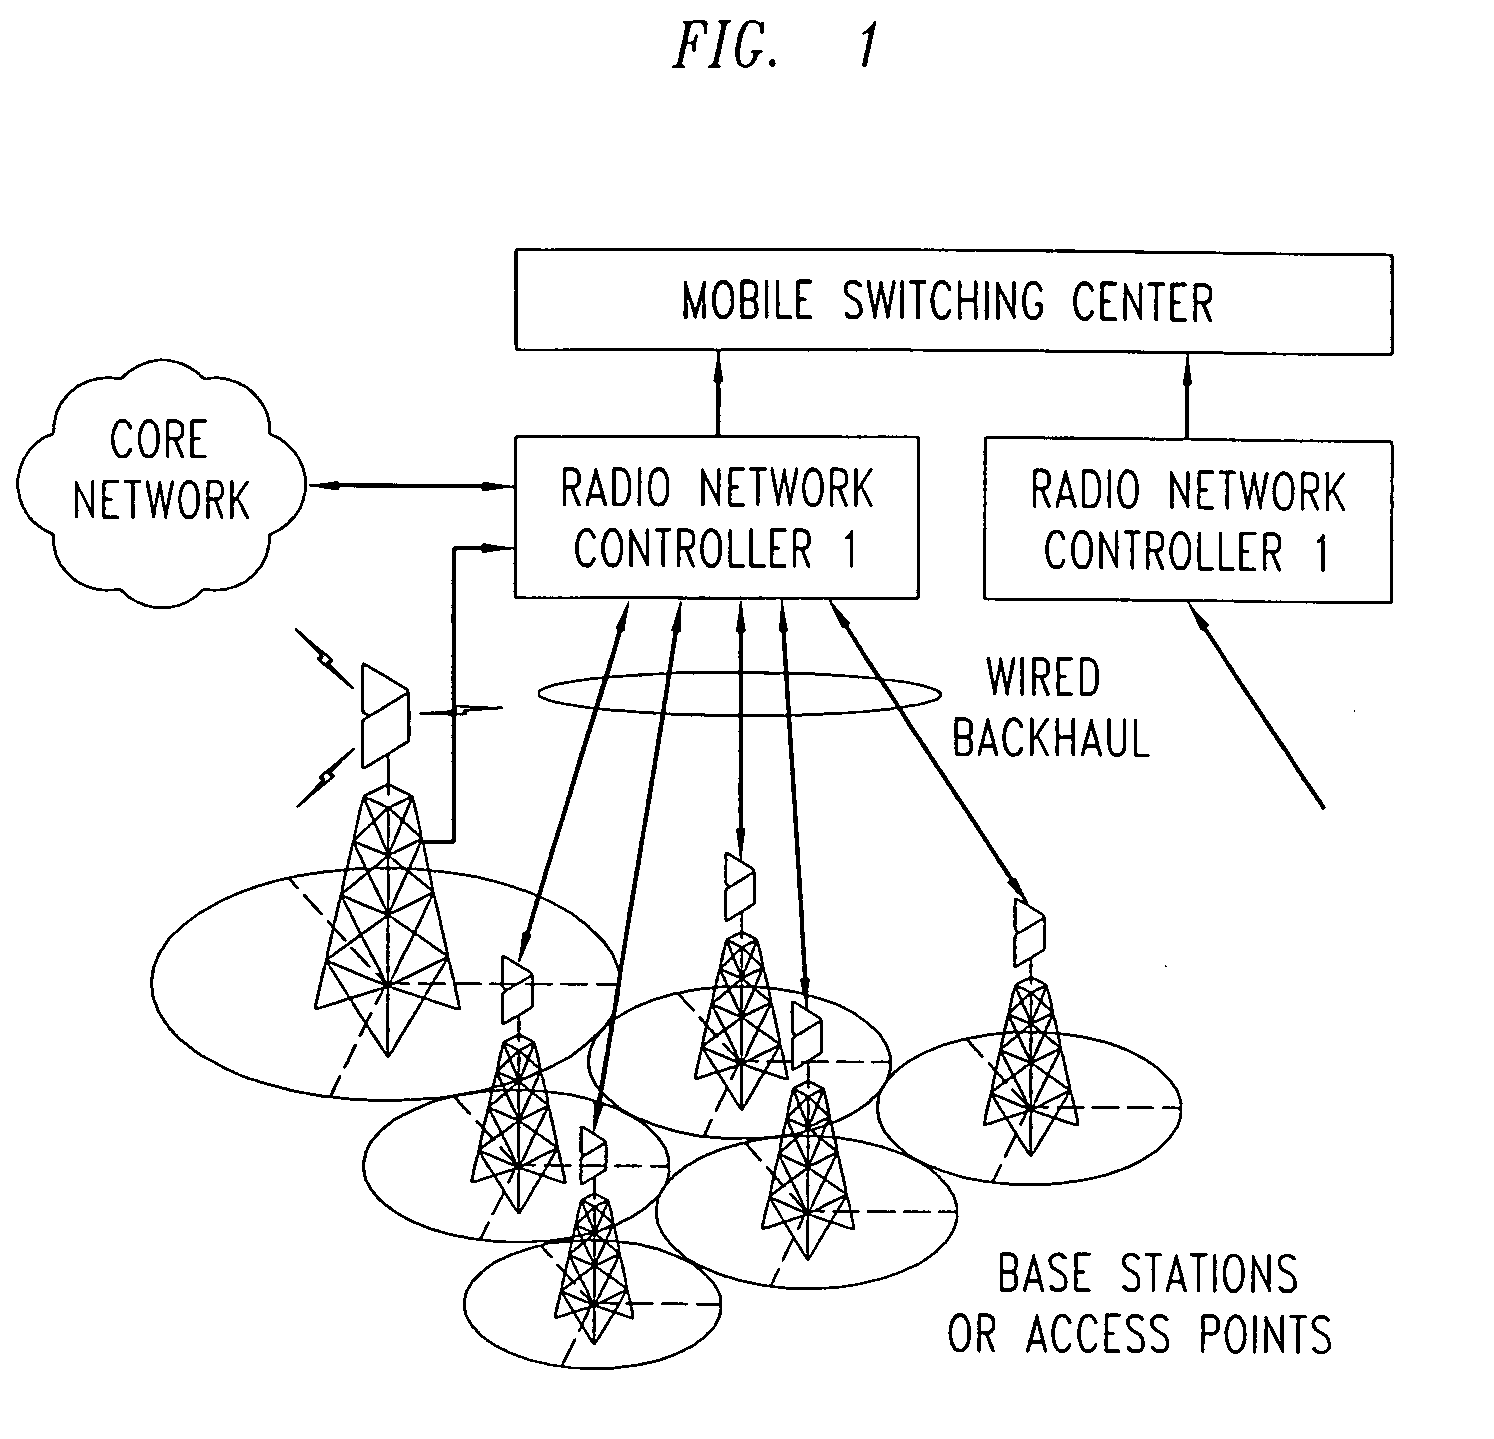 Method for routing via access terminals